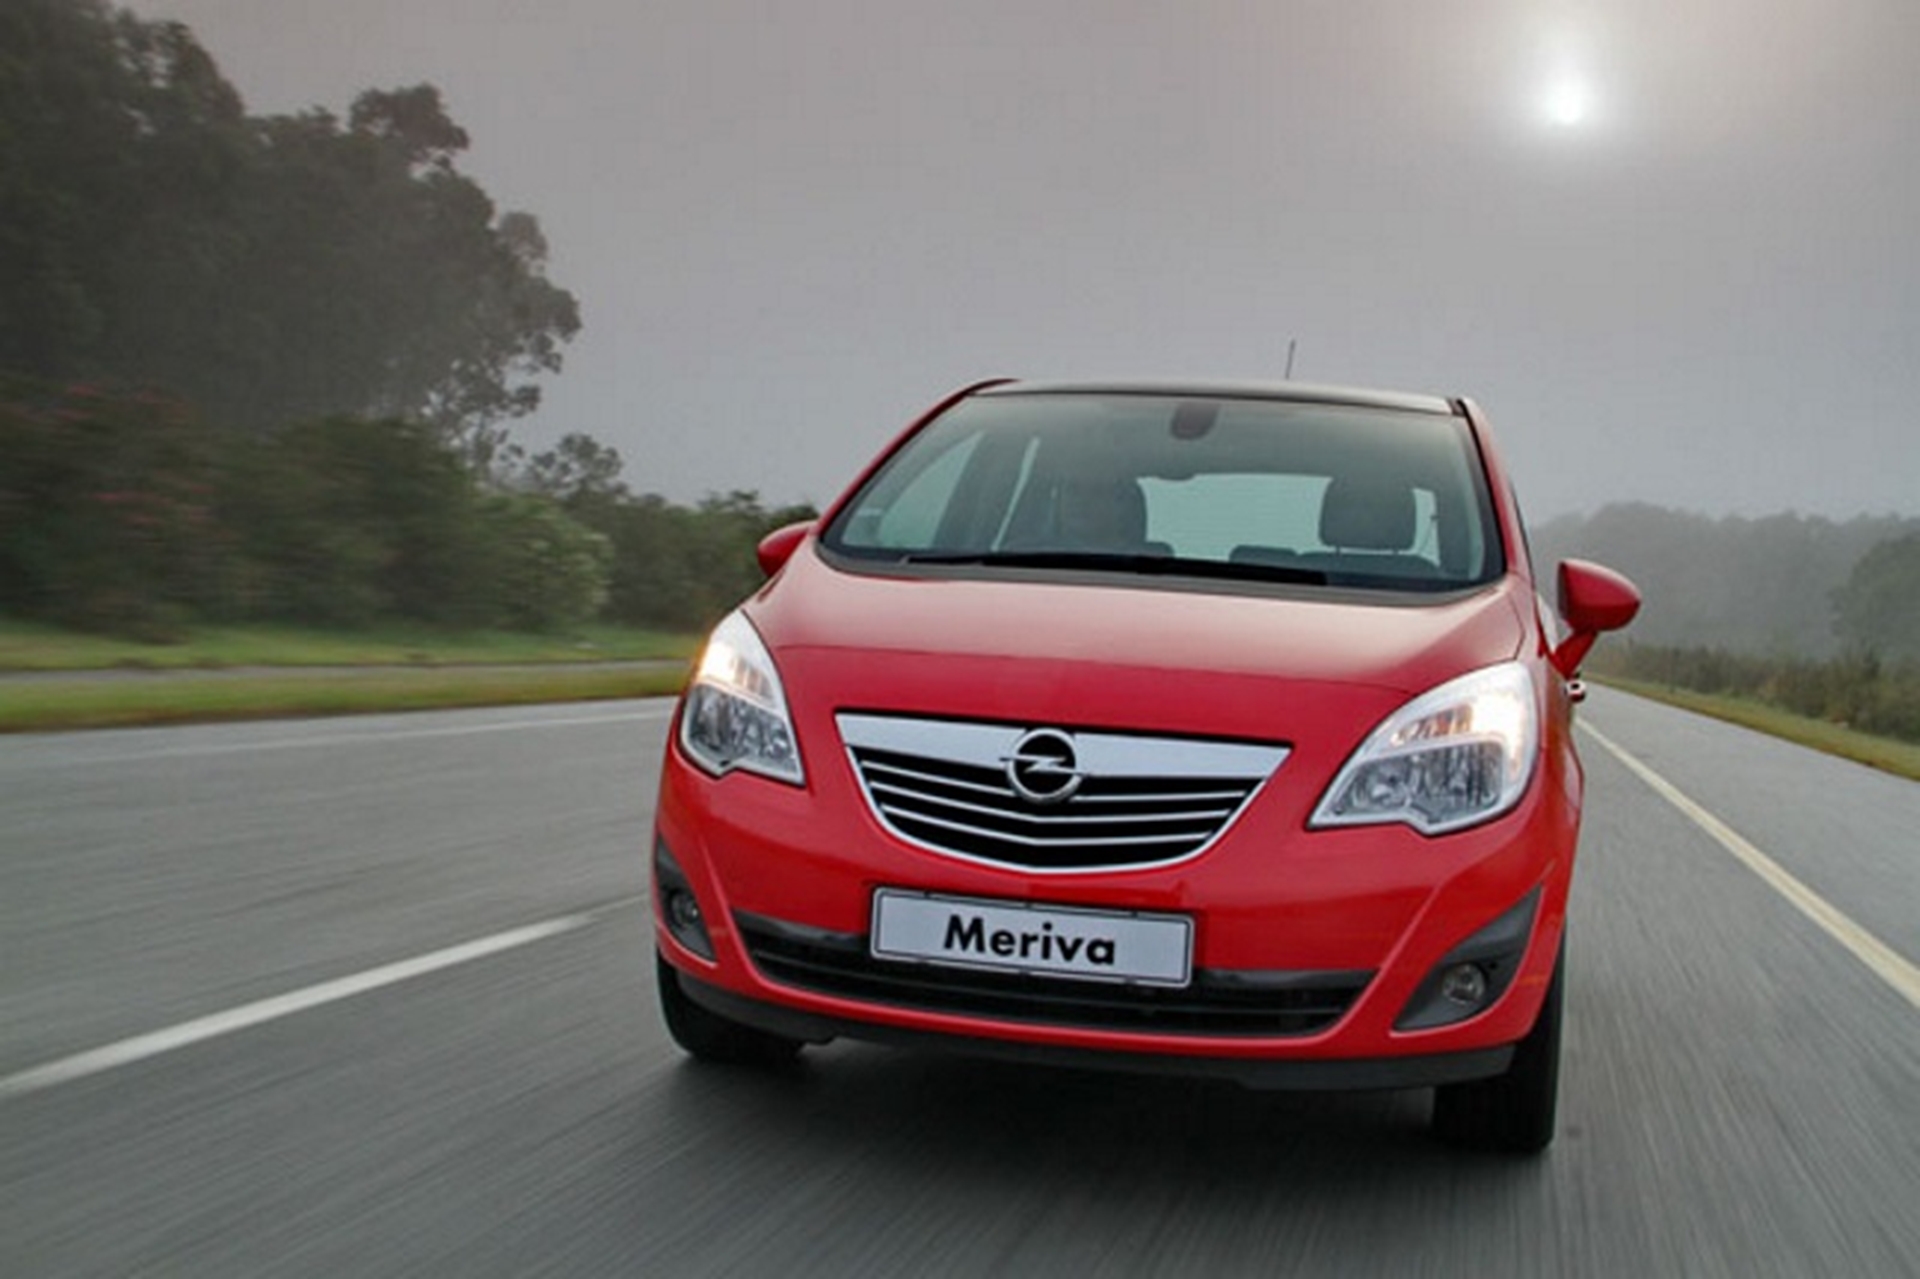 1.4 Litre Turbocharged Petrol Engine For New Opel Meriva Enjoy And Cosmo Models